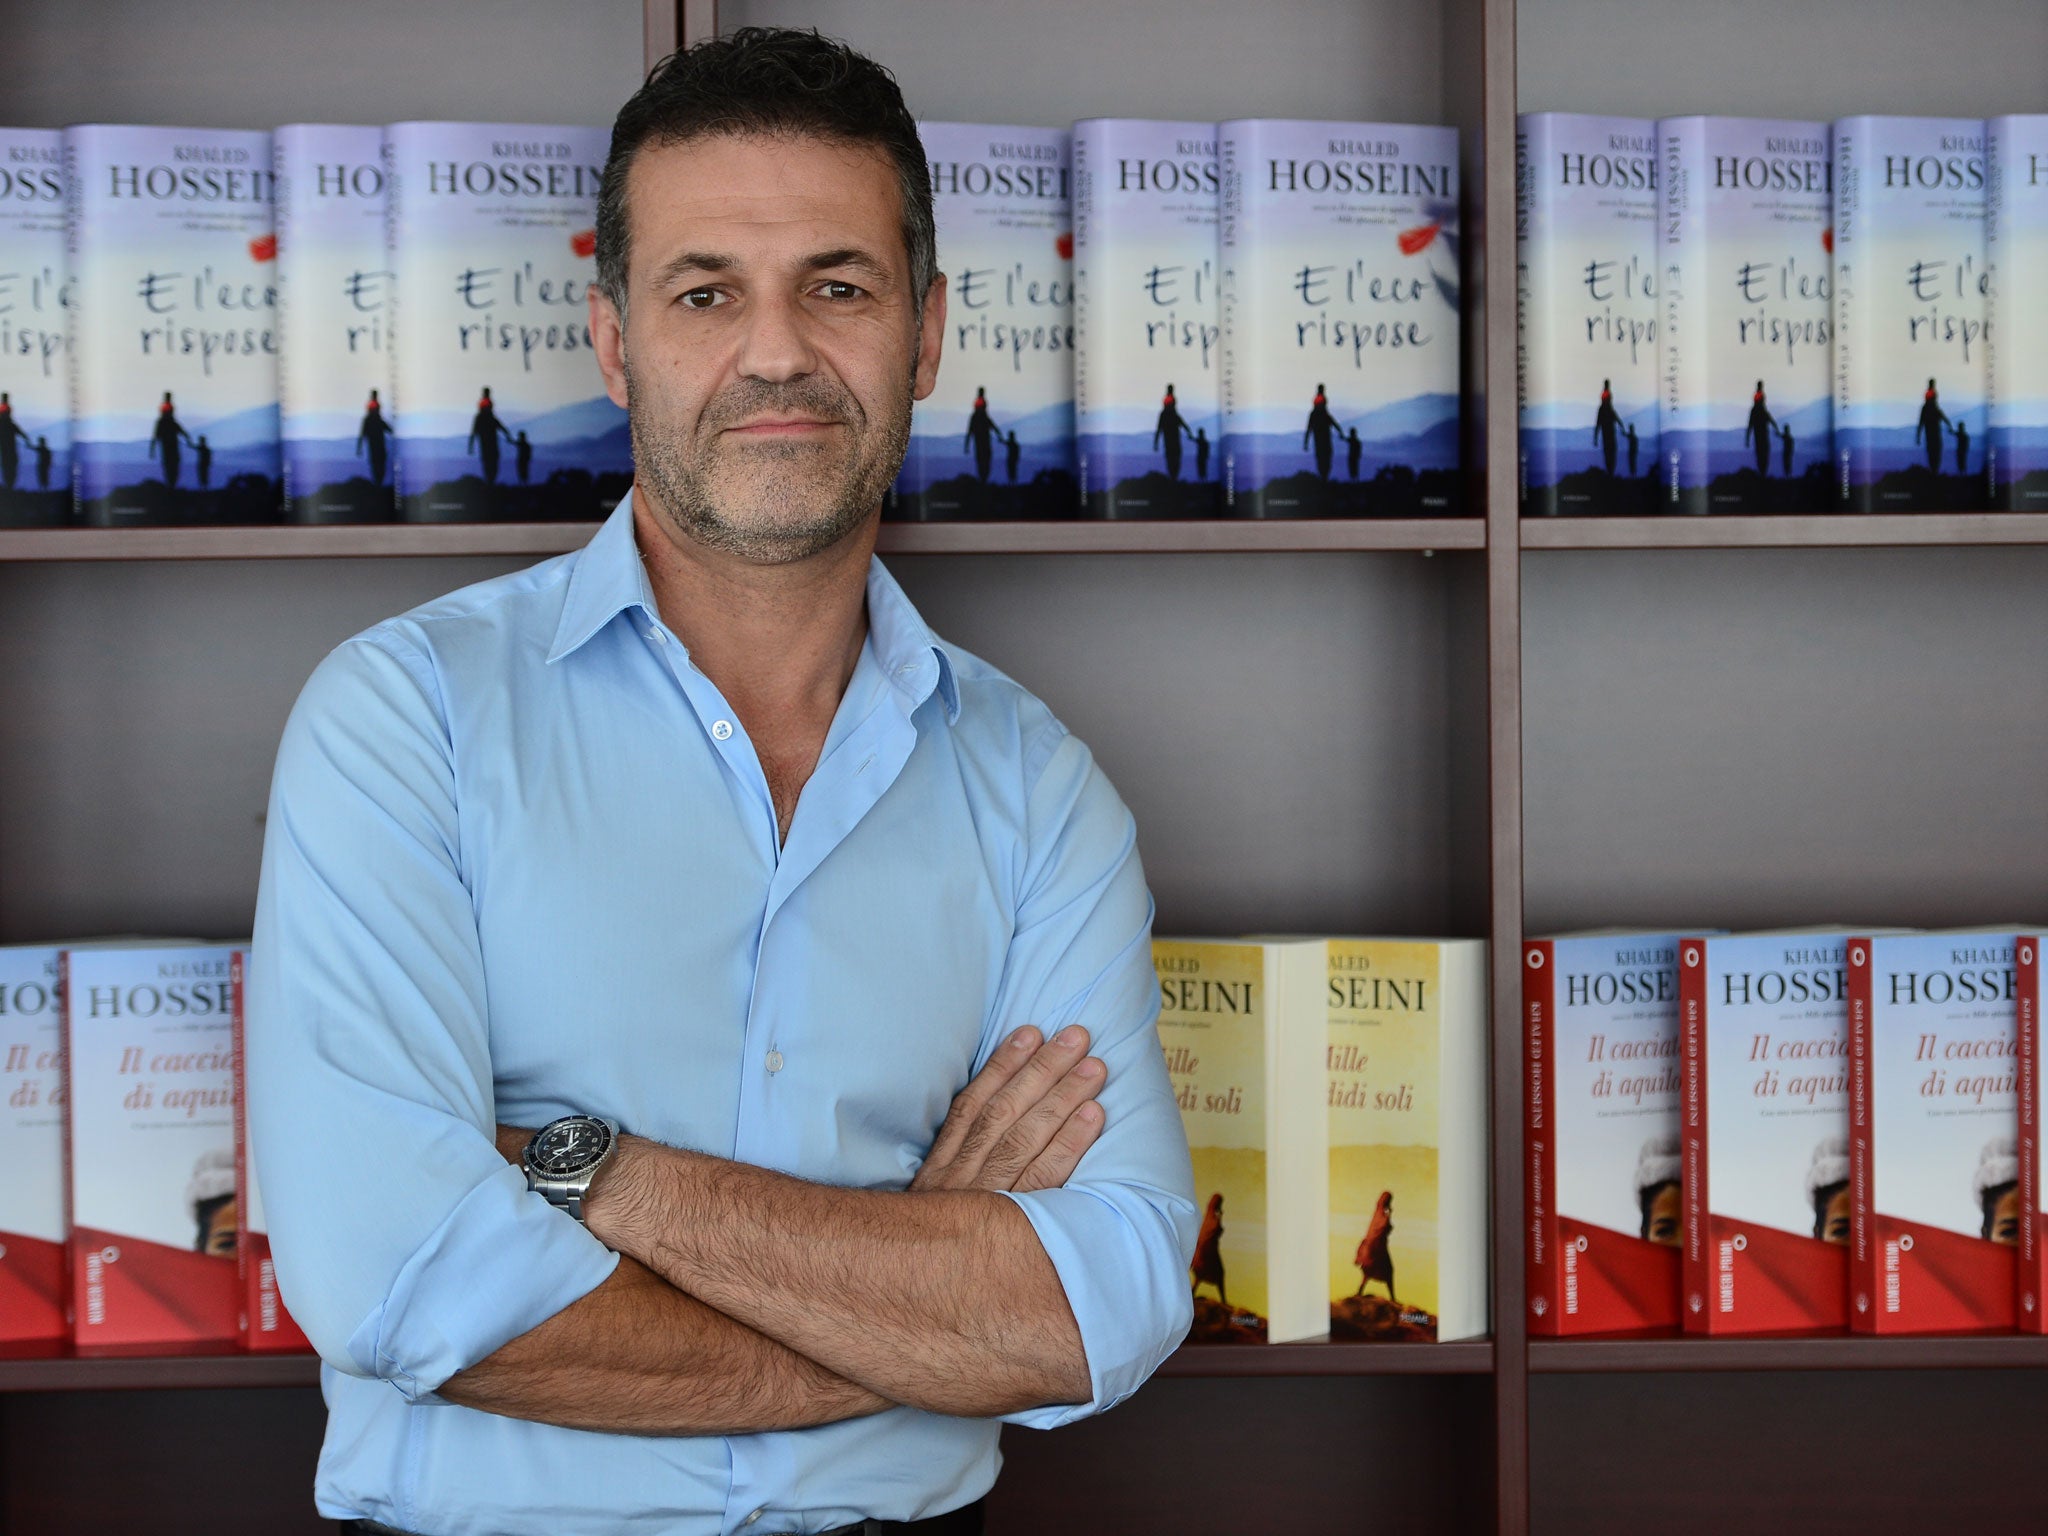 Challenging and thought-provoking: Khaled Hosseini